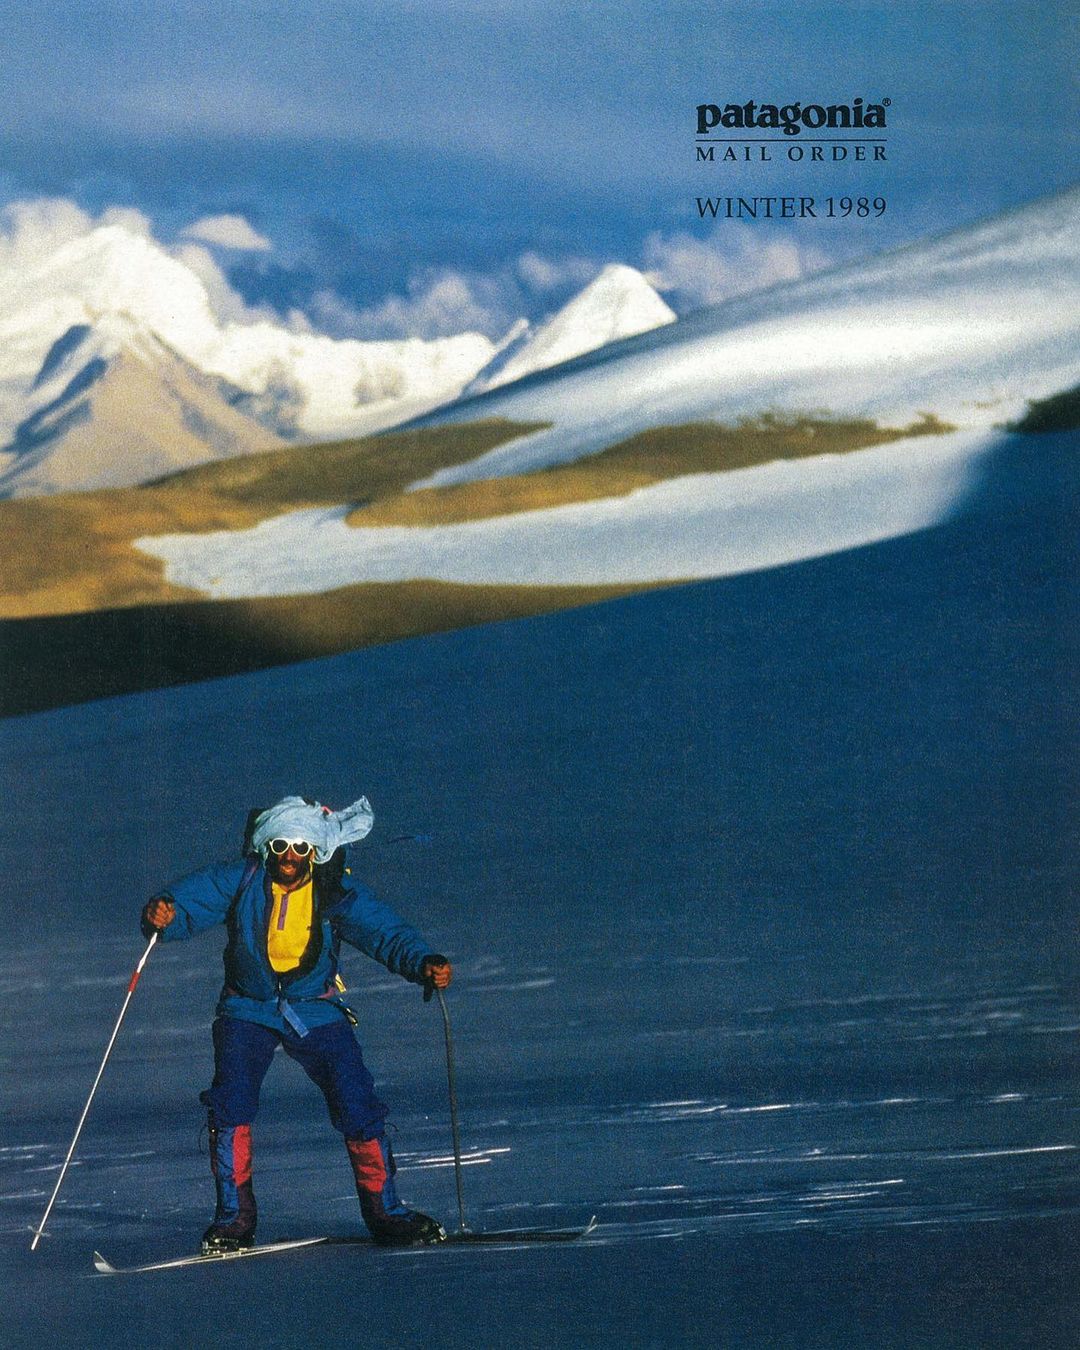 Peck Opdater lure Patagonia's amazing catalogs | Collater.al